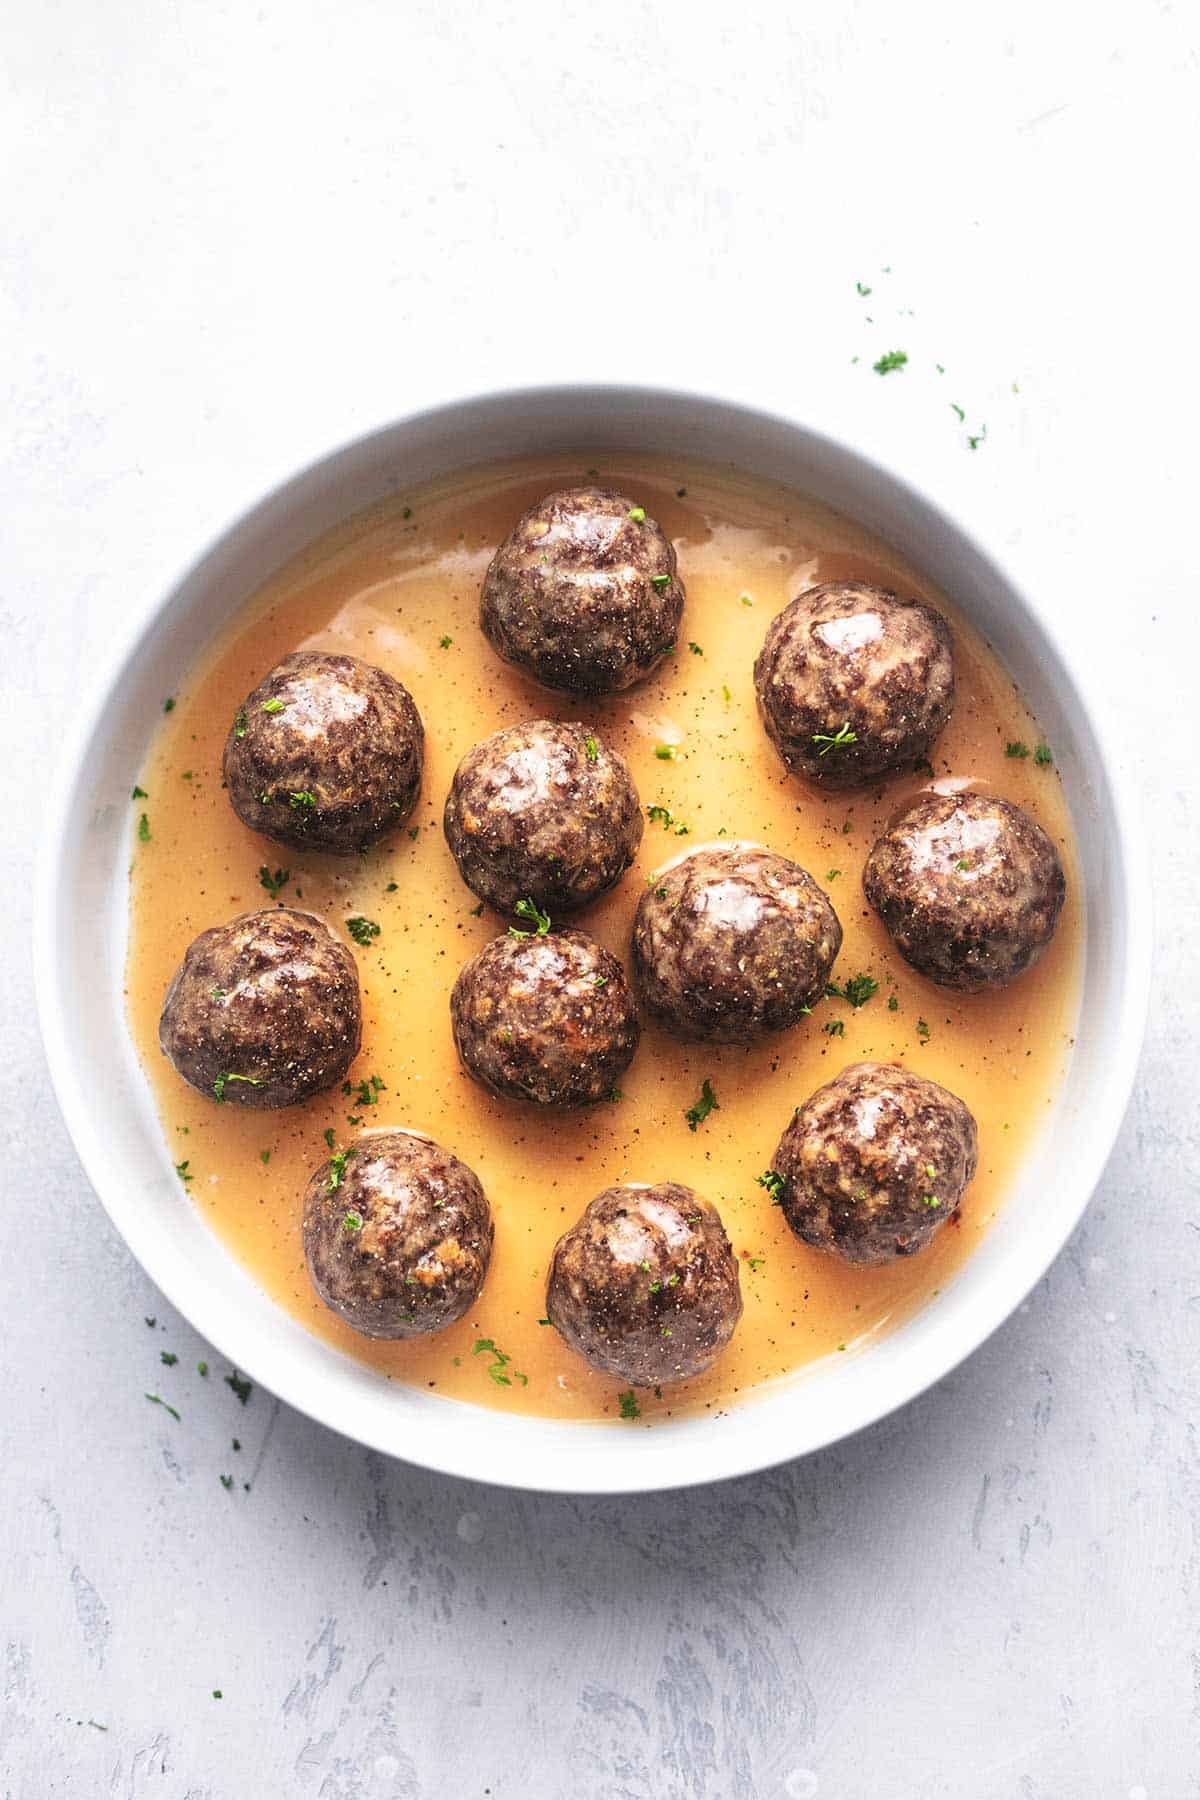 top view of baked meatballs with gravy on a plate.